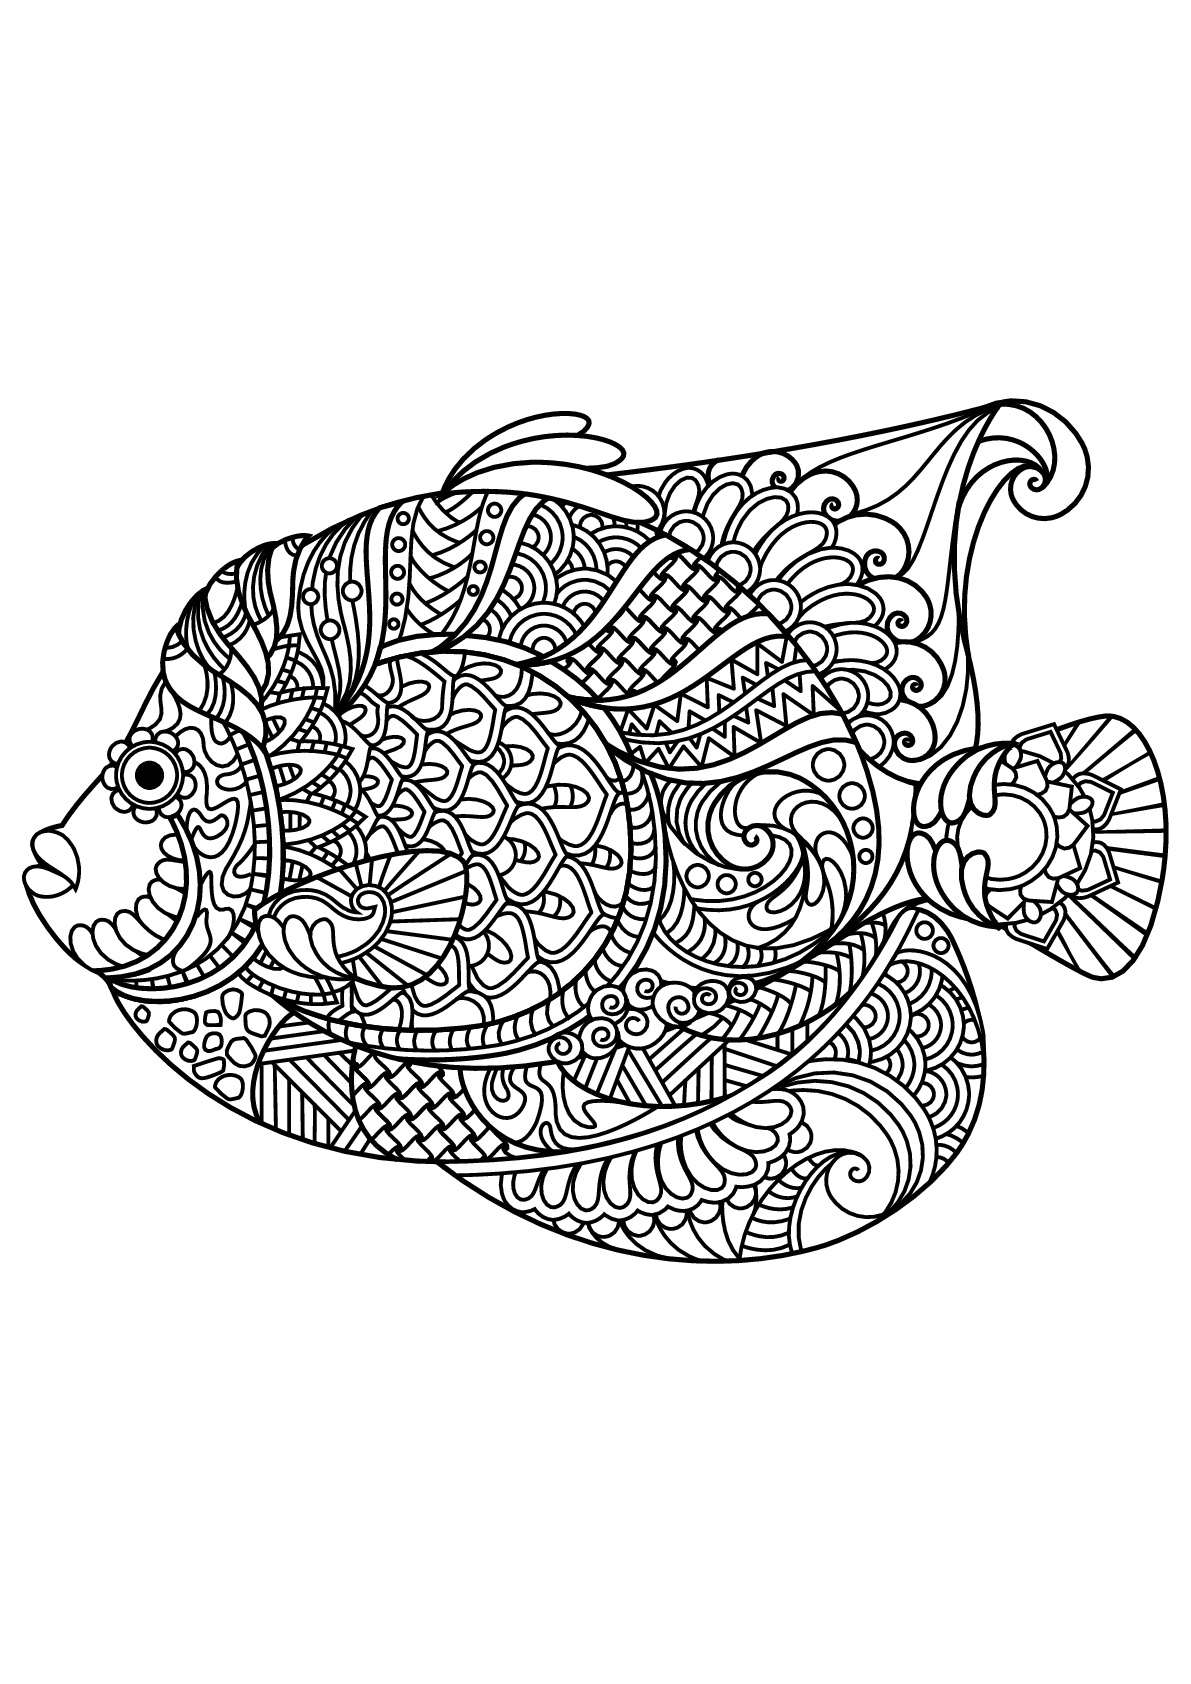 Fish, with complex and beautiful patterns